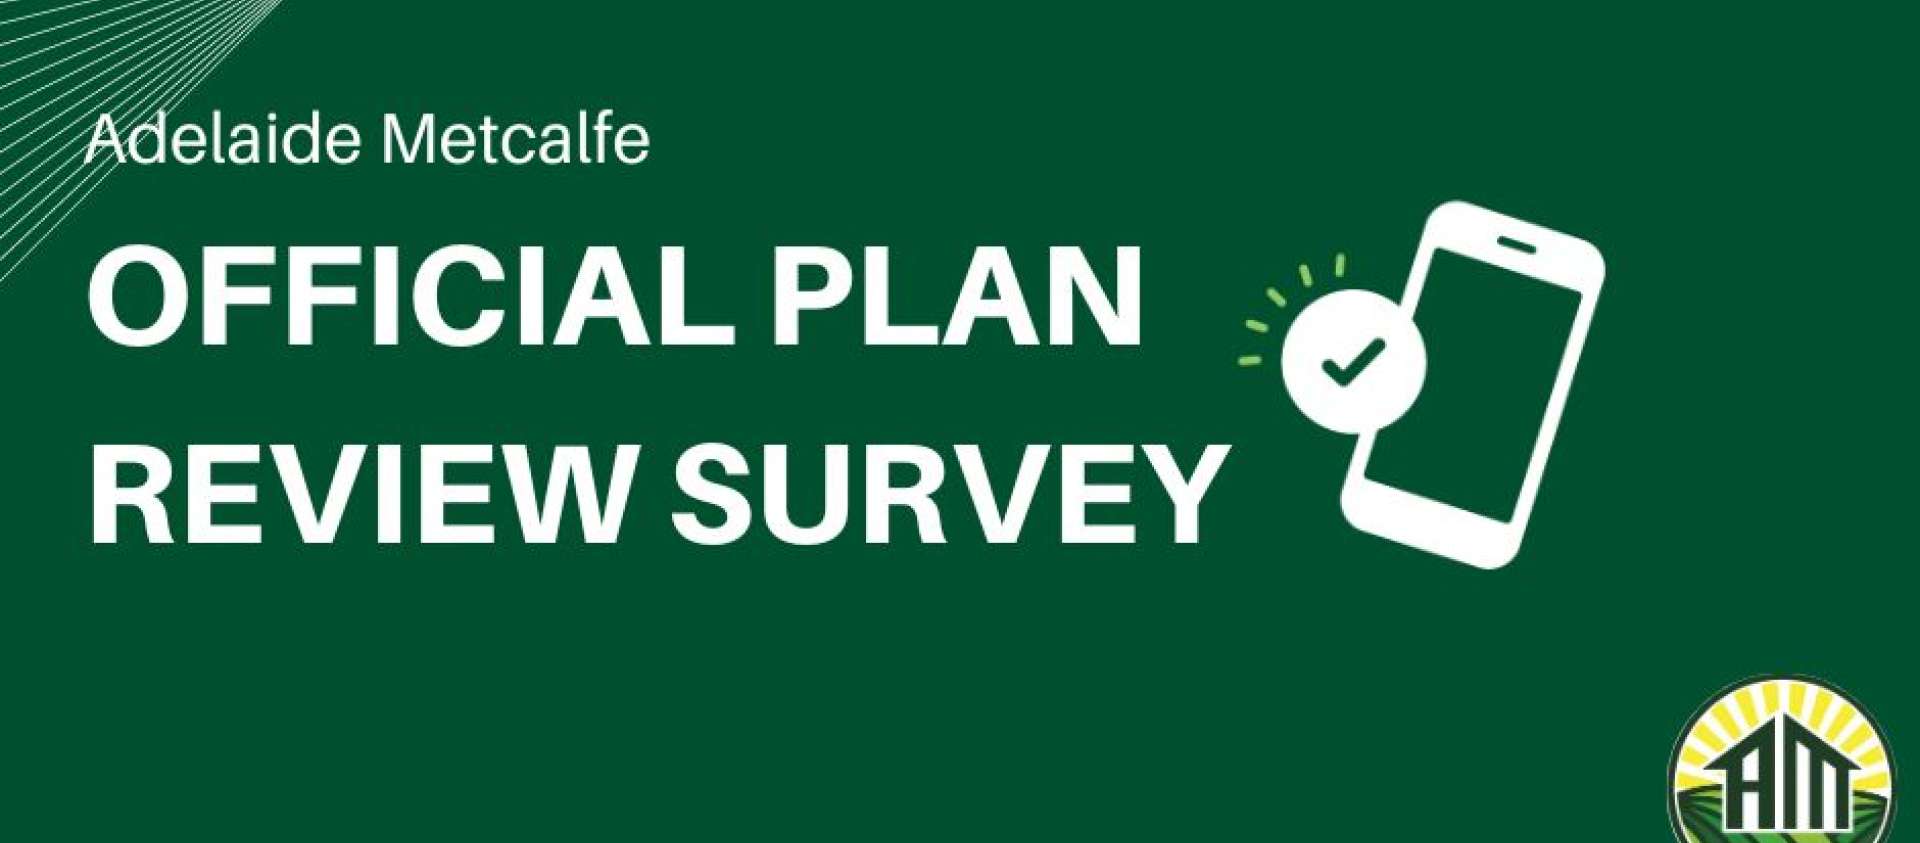 Header advertising the Official Plan Review Survey